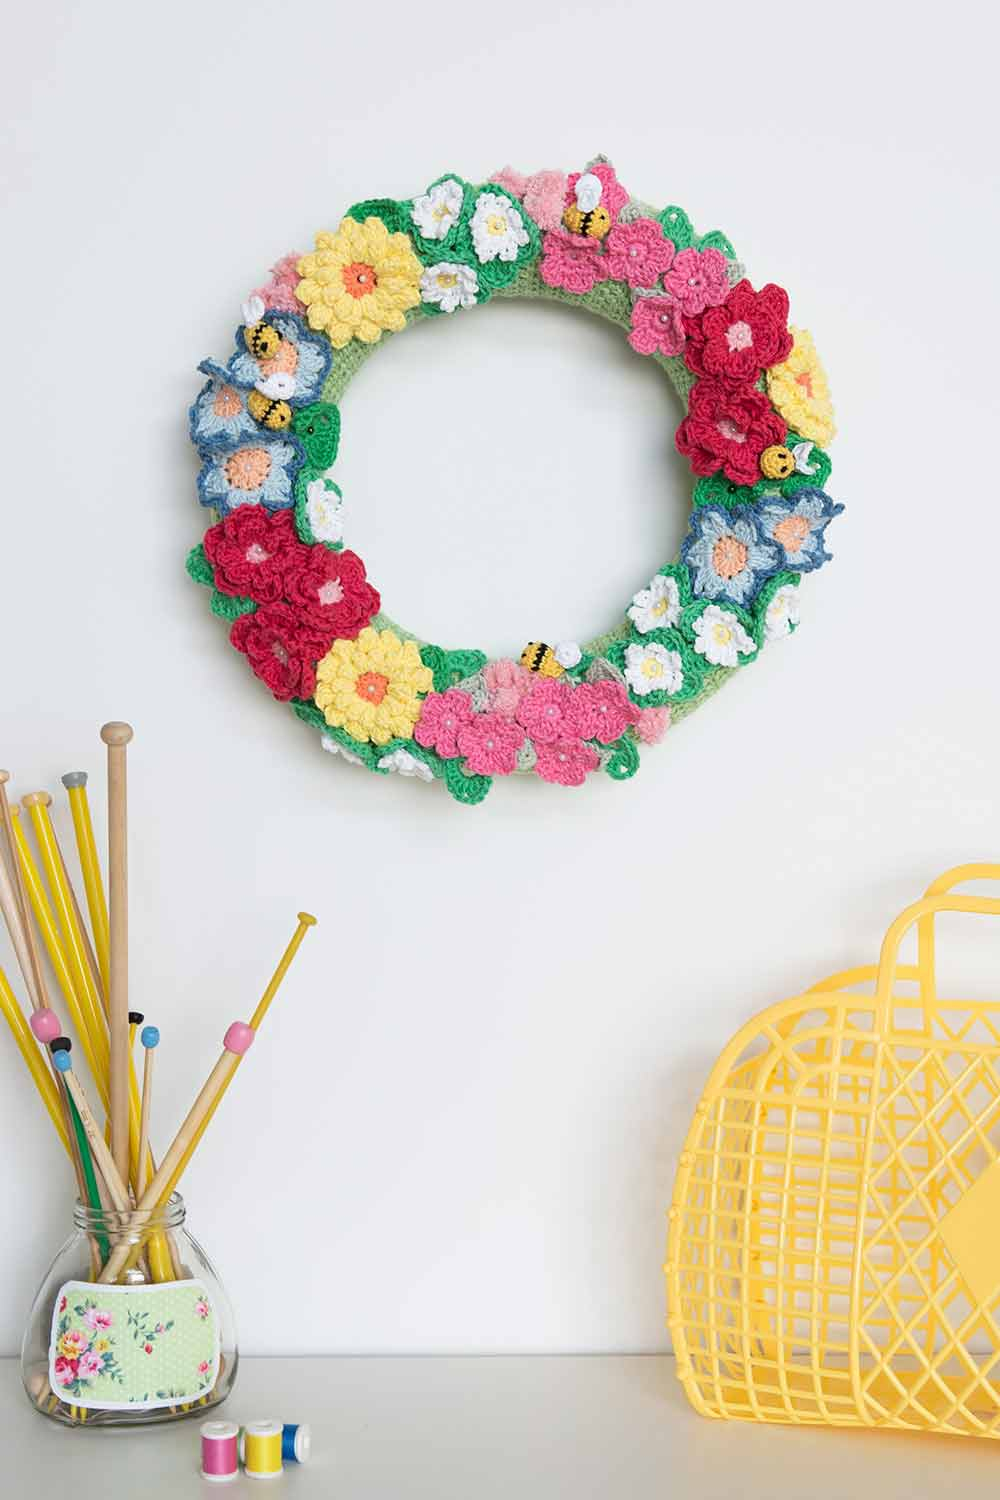 Small Crochet Flower Pattern 40 Crochet Flower Patterns And What To Do With Them Mollie Makes